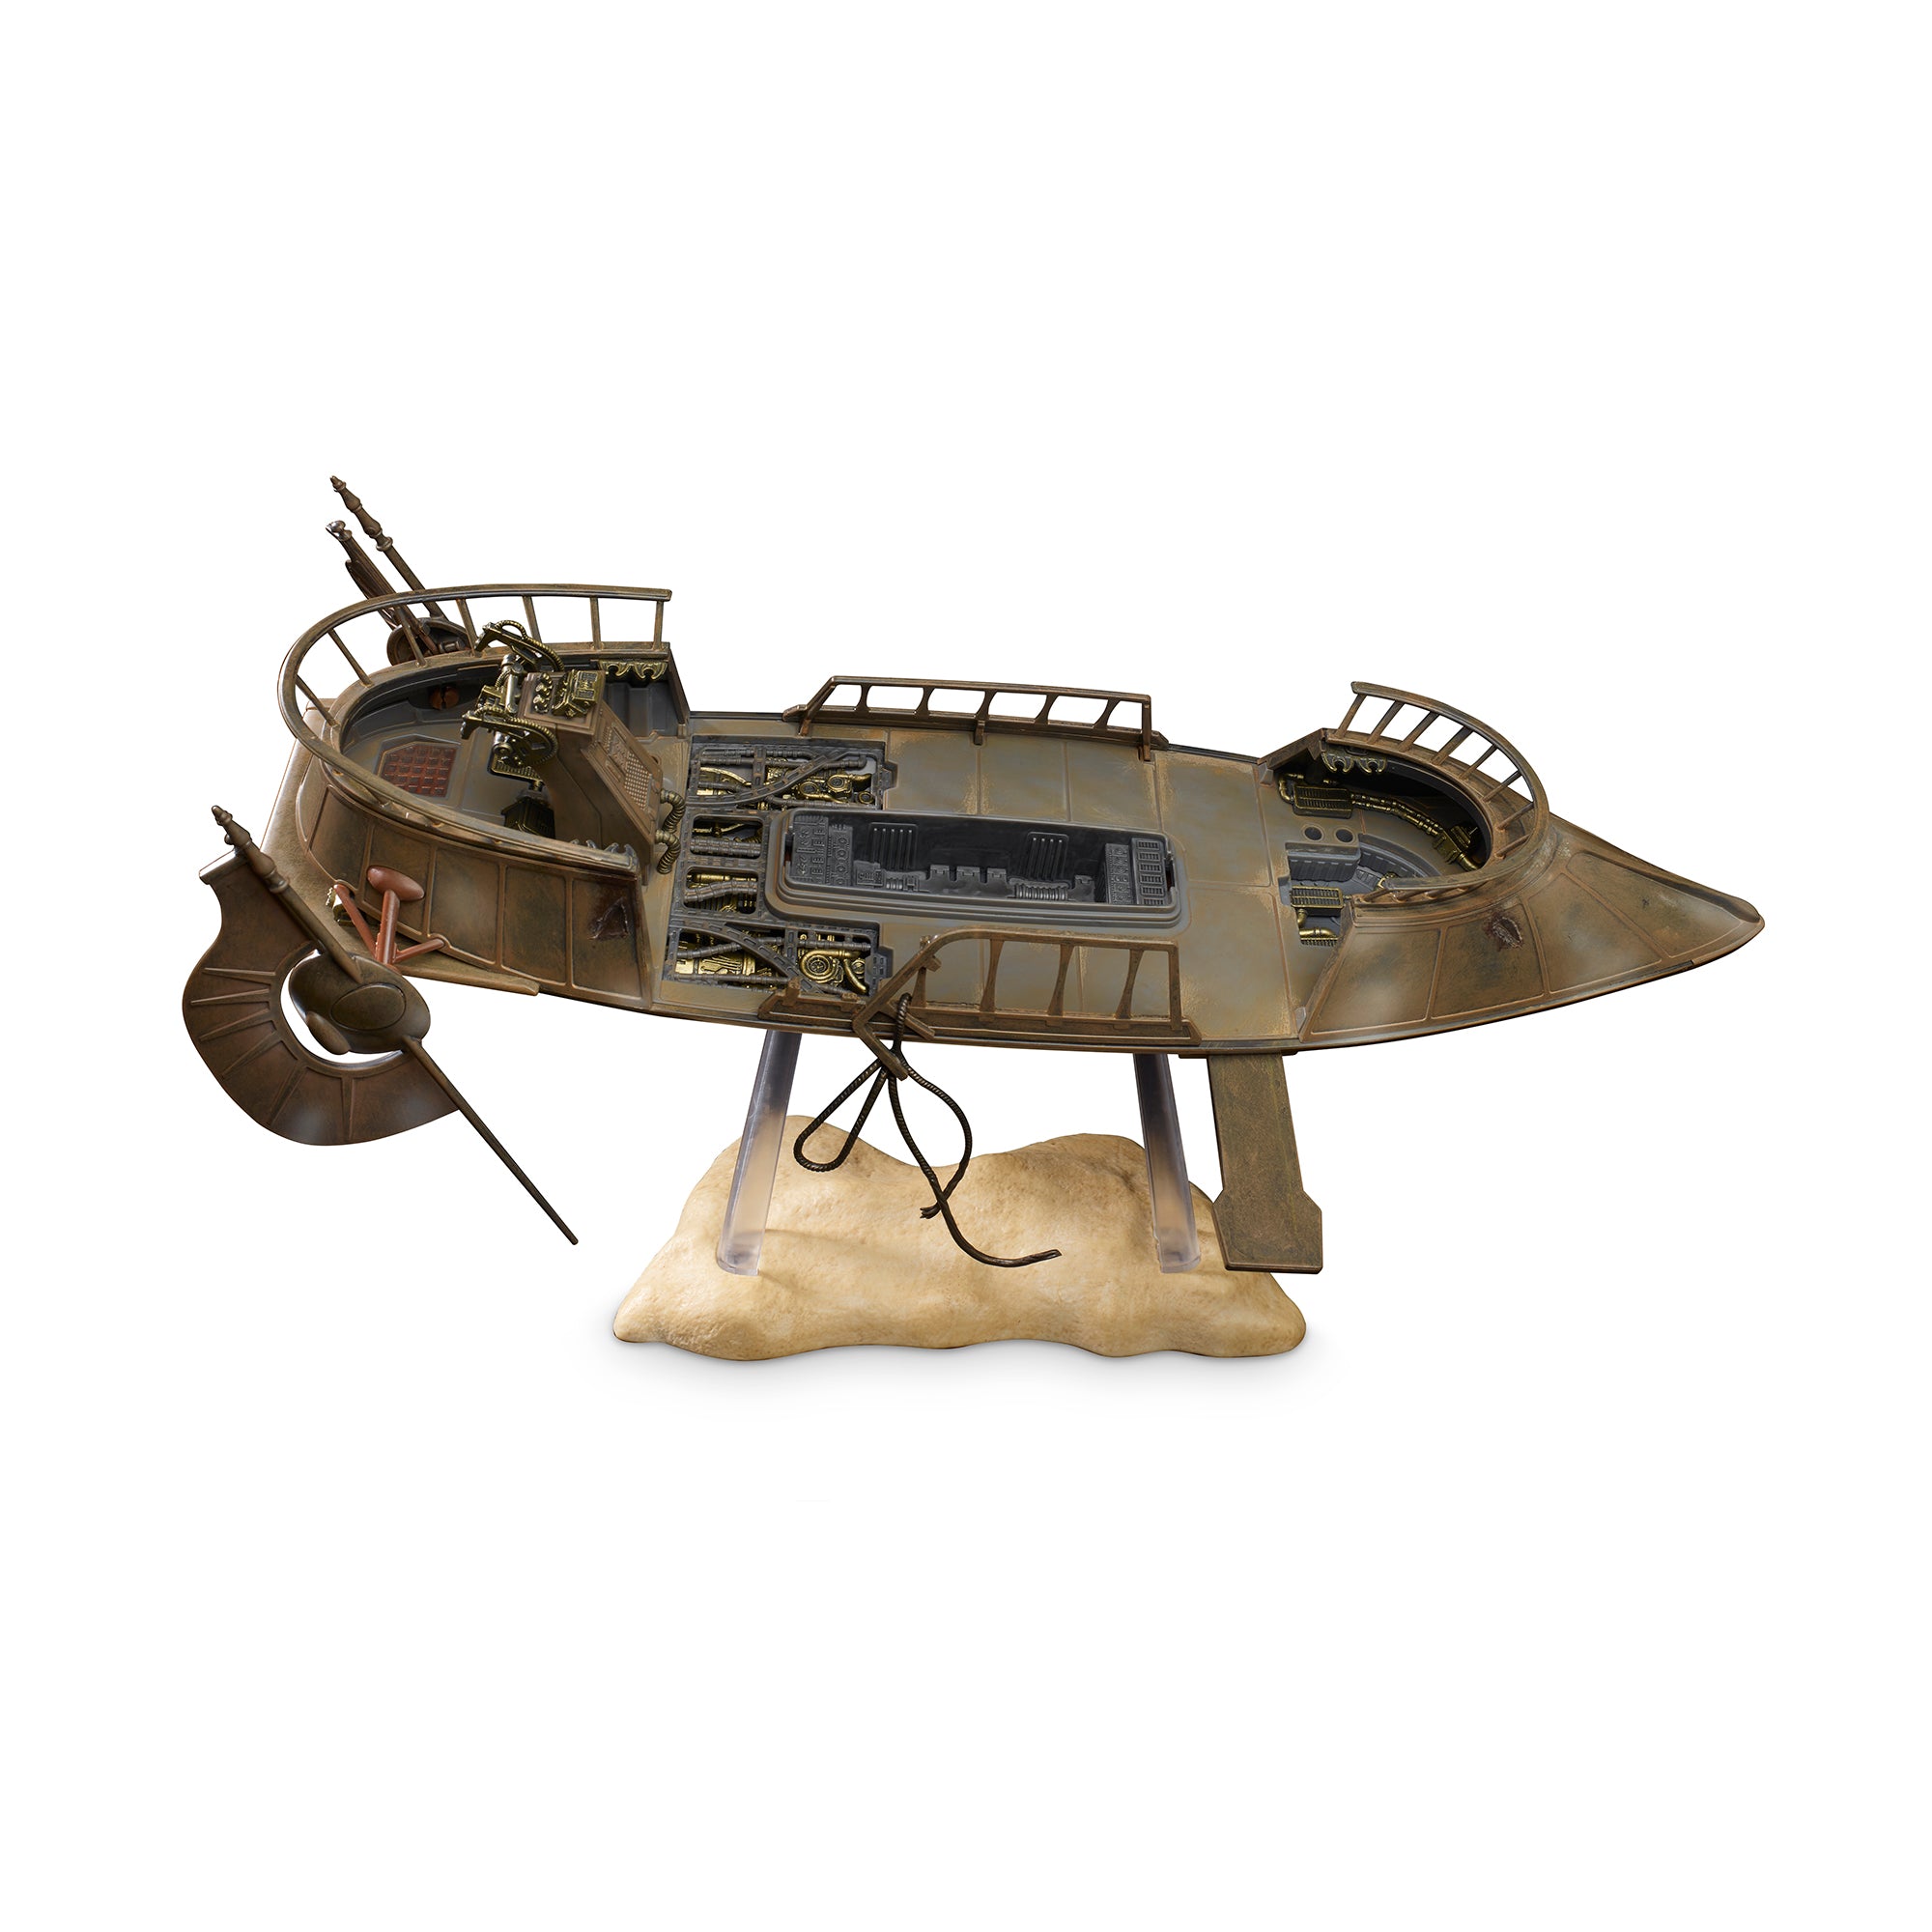 E6060_Star_Wars_The_Vintage_Collection_Episode_VI_Return_of_The_Jedi_Jabba_s_Tatooine_Skiff_Collectible_Vehicle_5_72900c75-641c-4a14-b698-88a16adb2351_2000x.jpg?v=1550502640